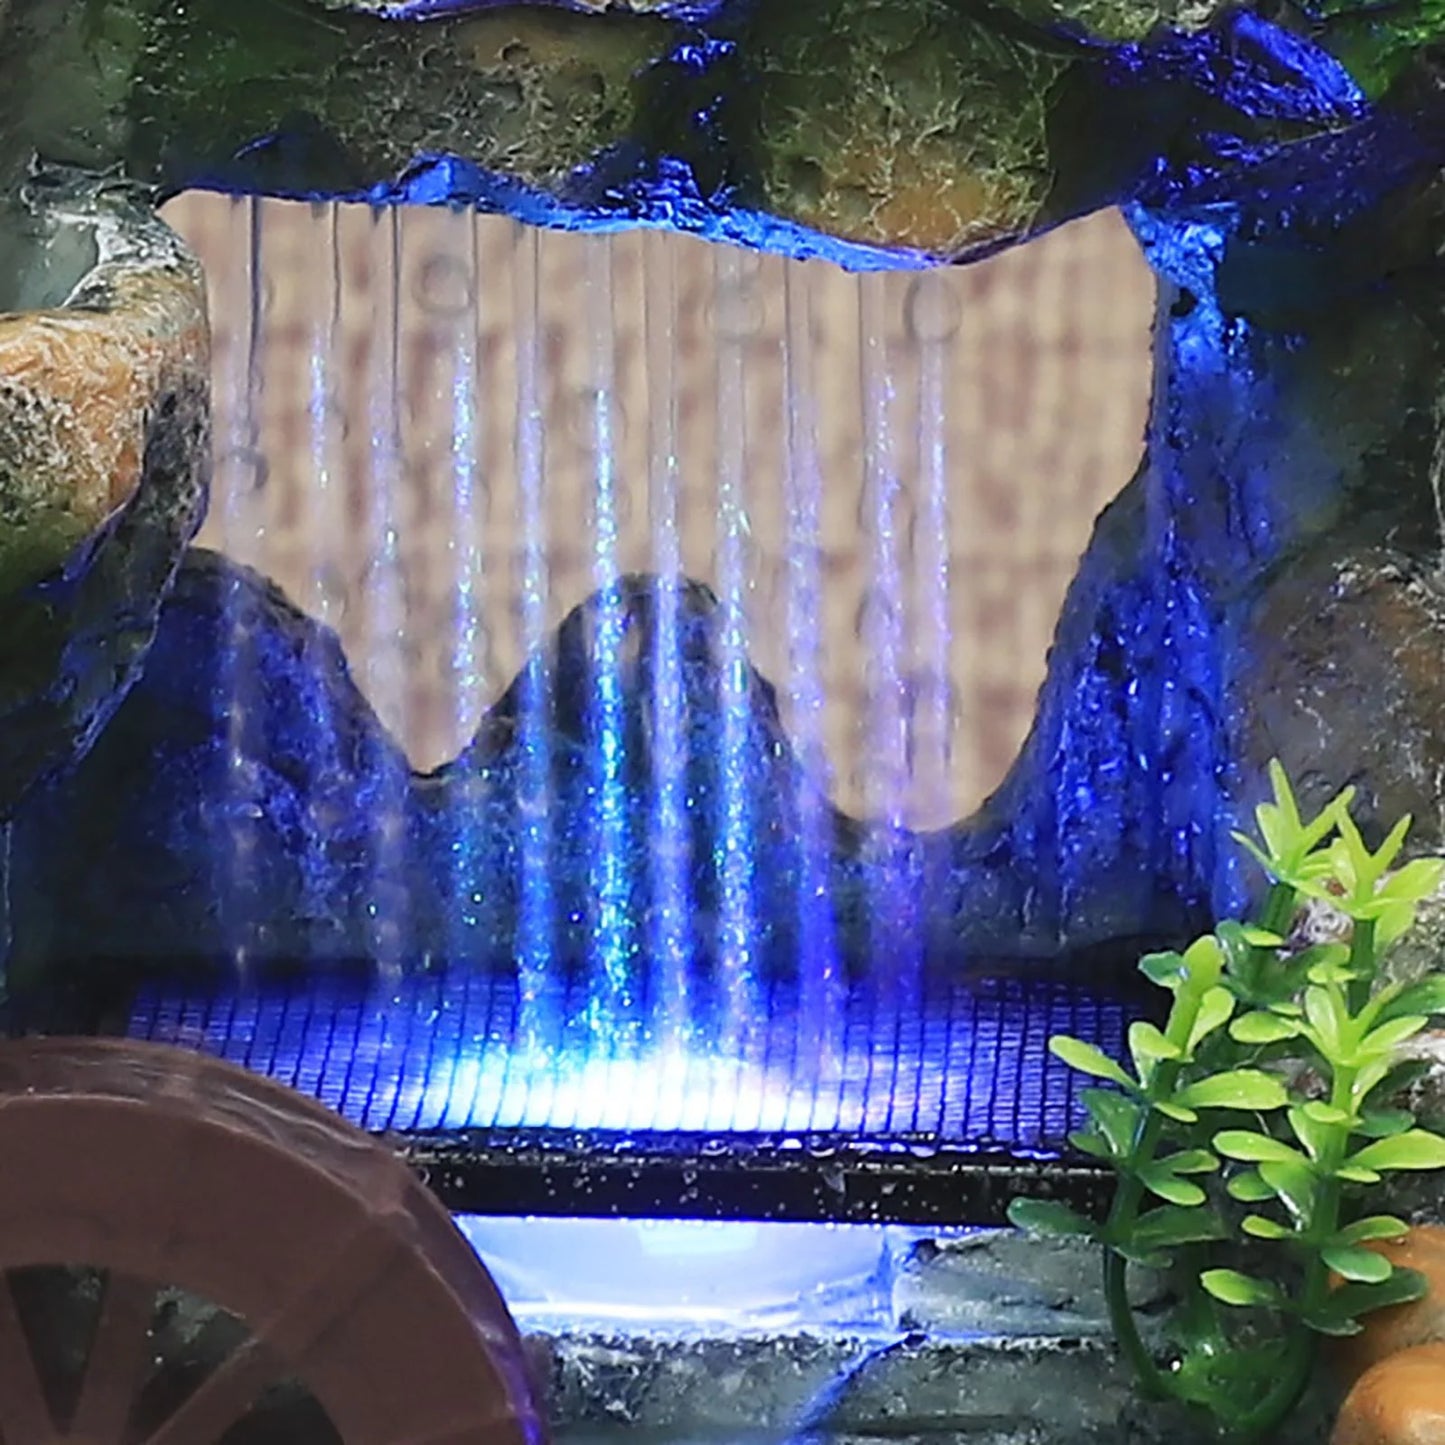 Fountain Waterfall Desktop with LED Lighting